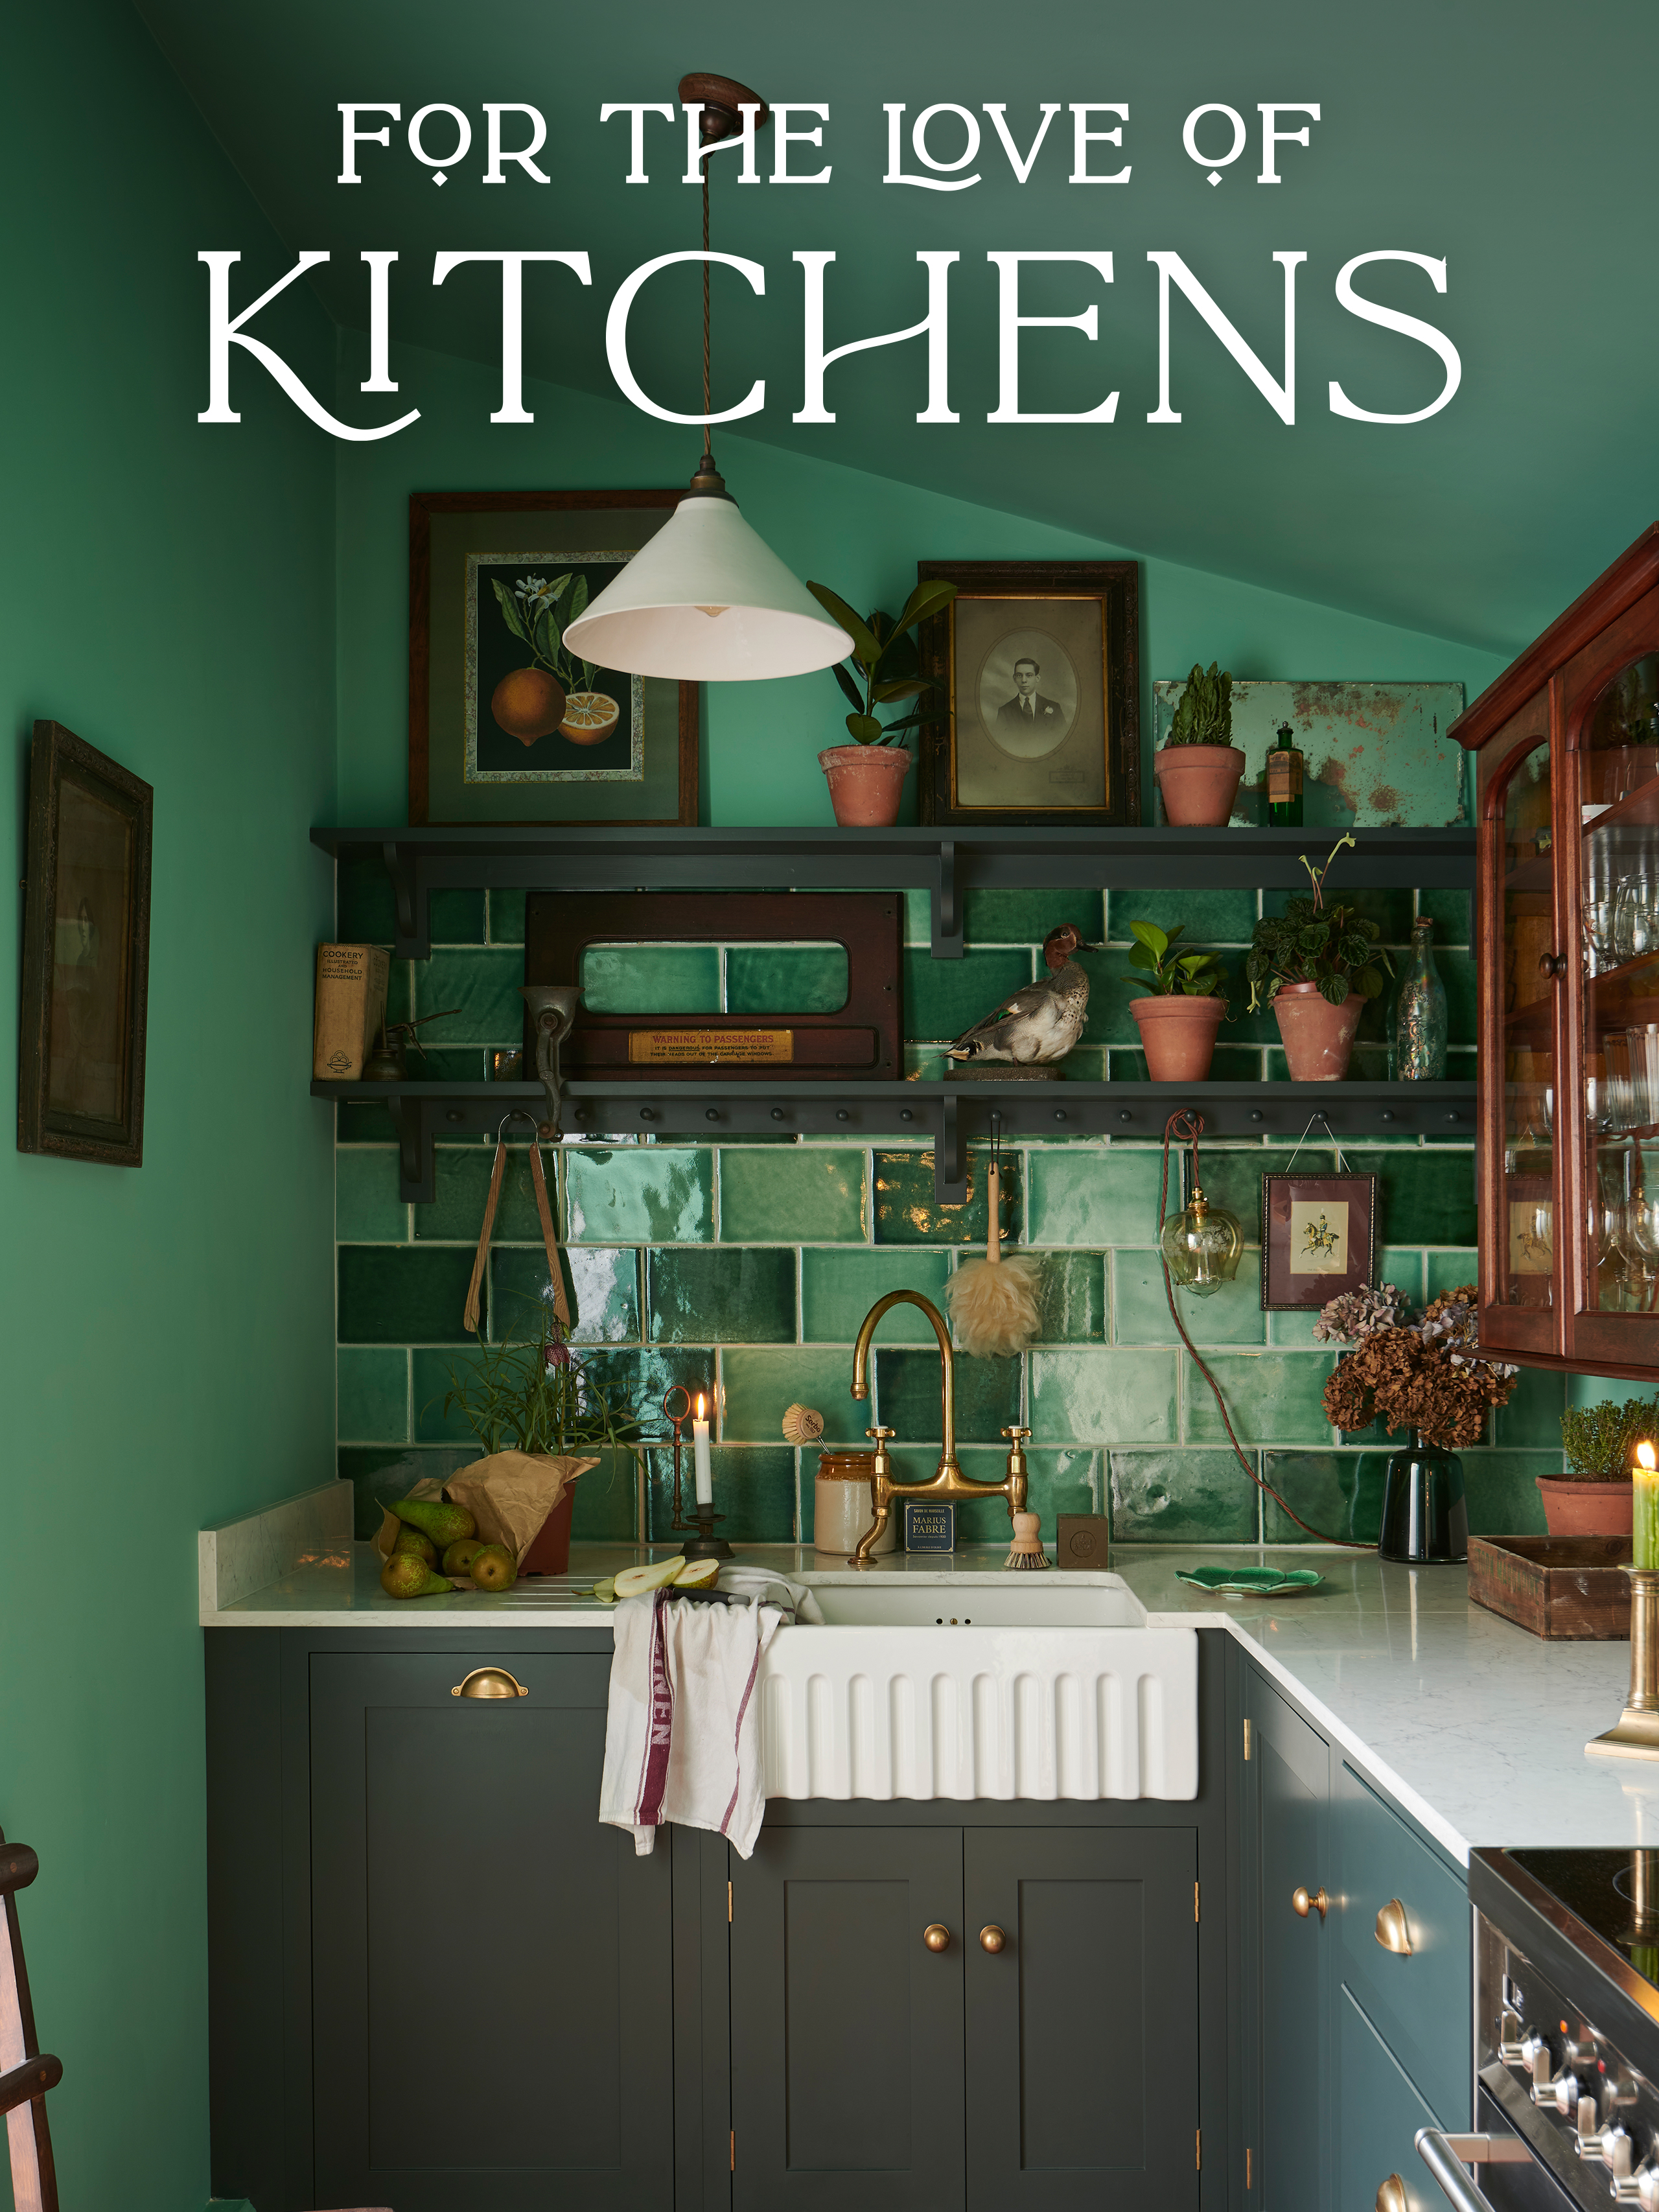 For The Love of Kitchens Season 1 Episode 7